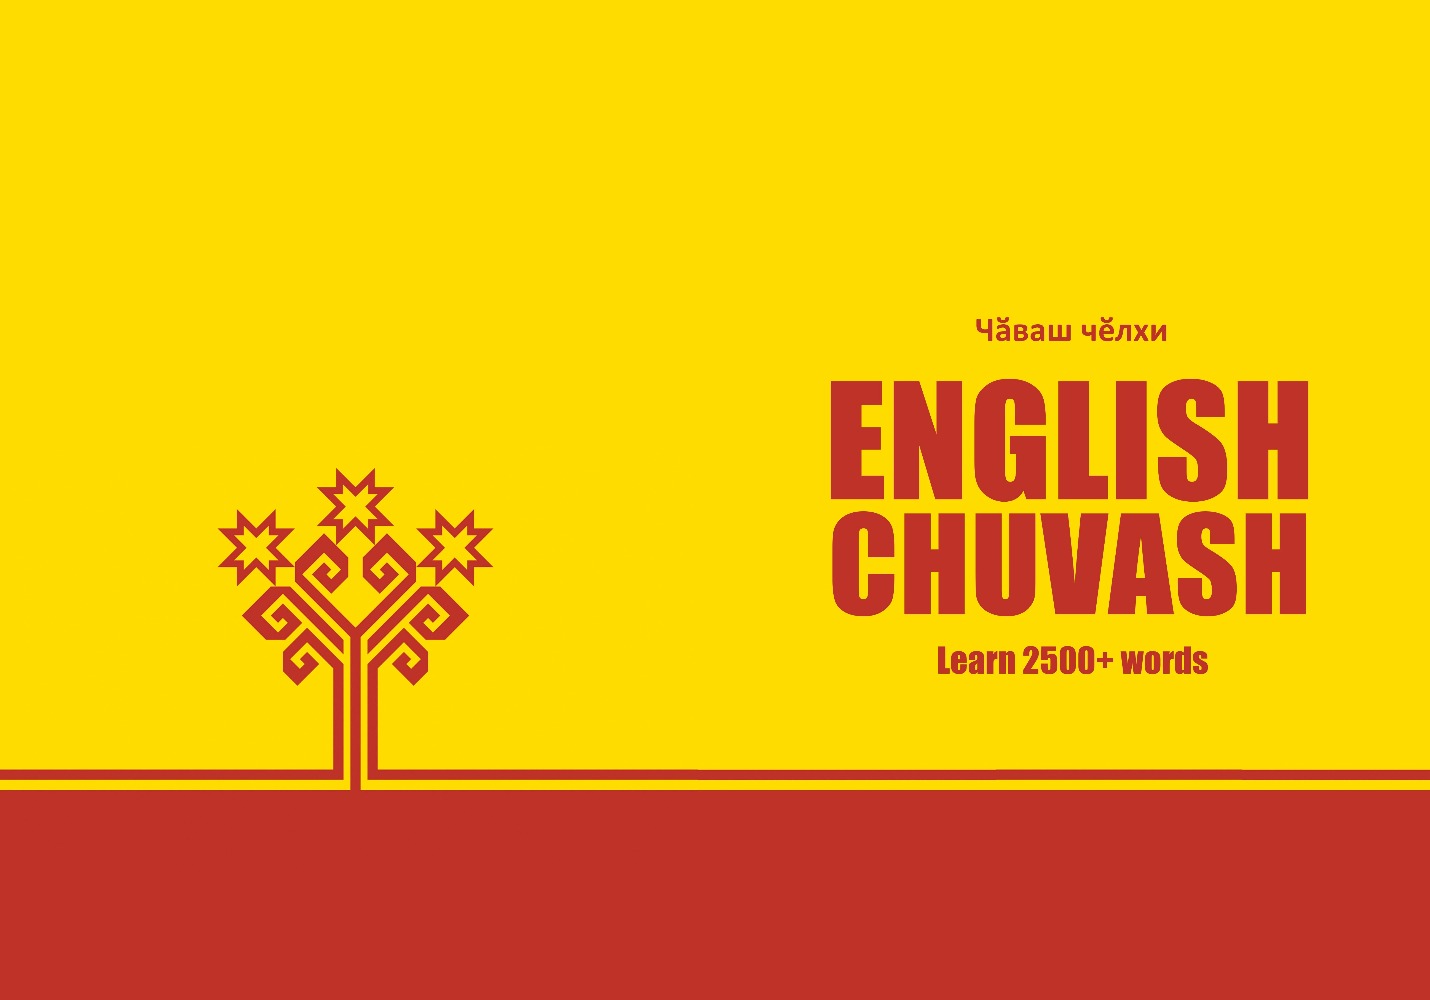 Chuvash language learning notebook cover